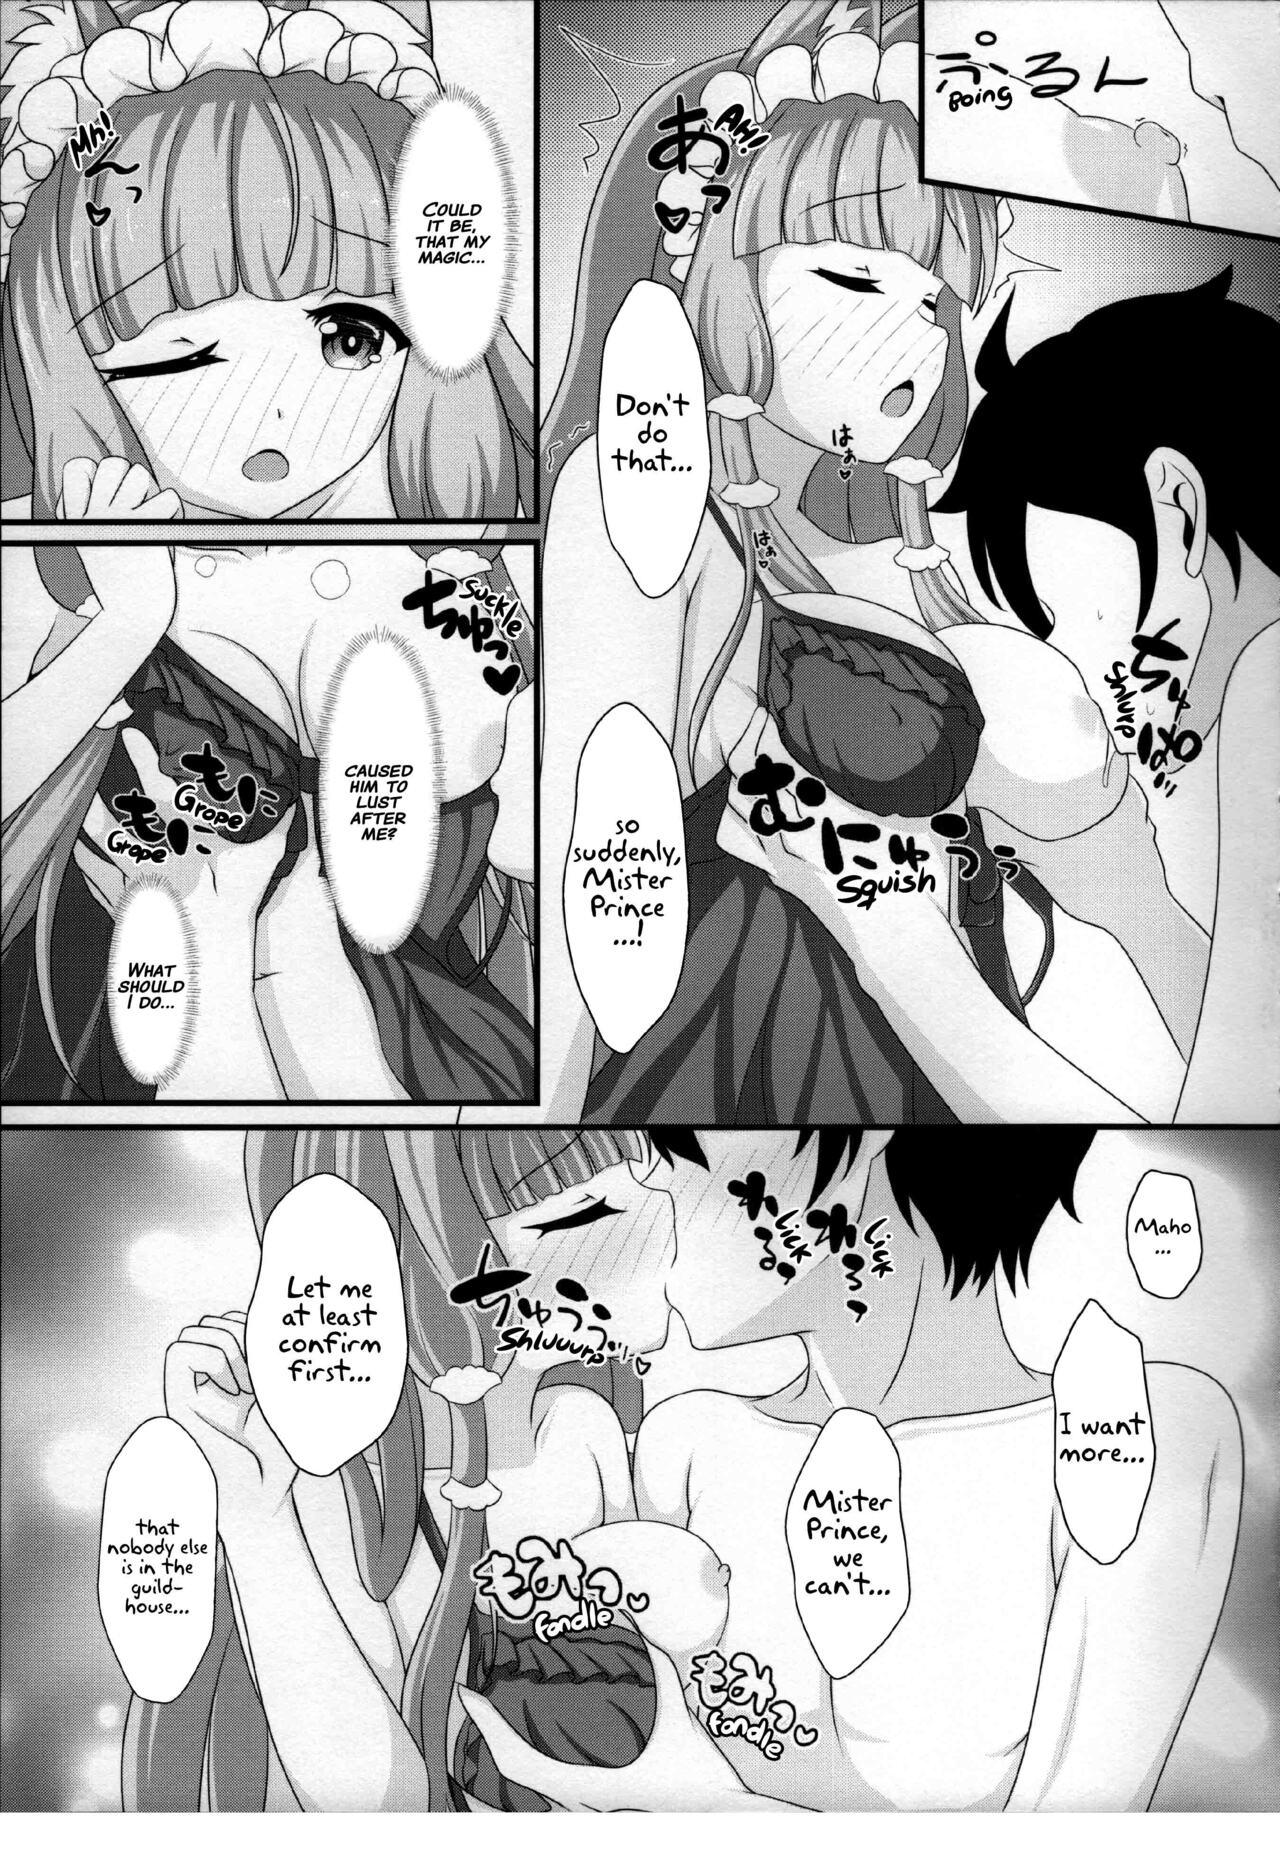 Internal Maho Hime Connect! 3 - Princess connect Urine - Page 9